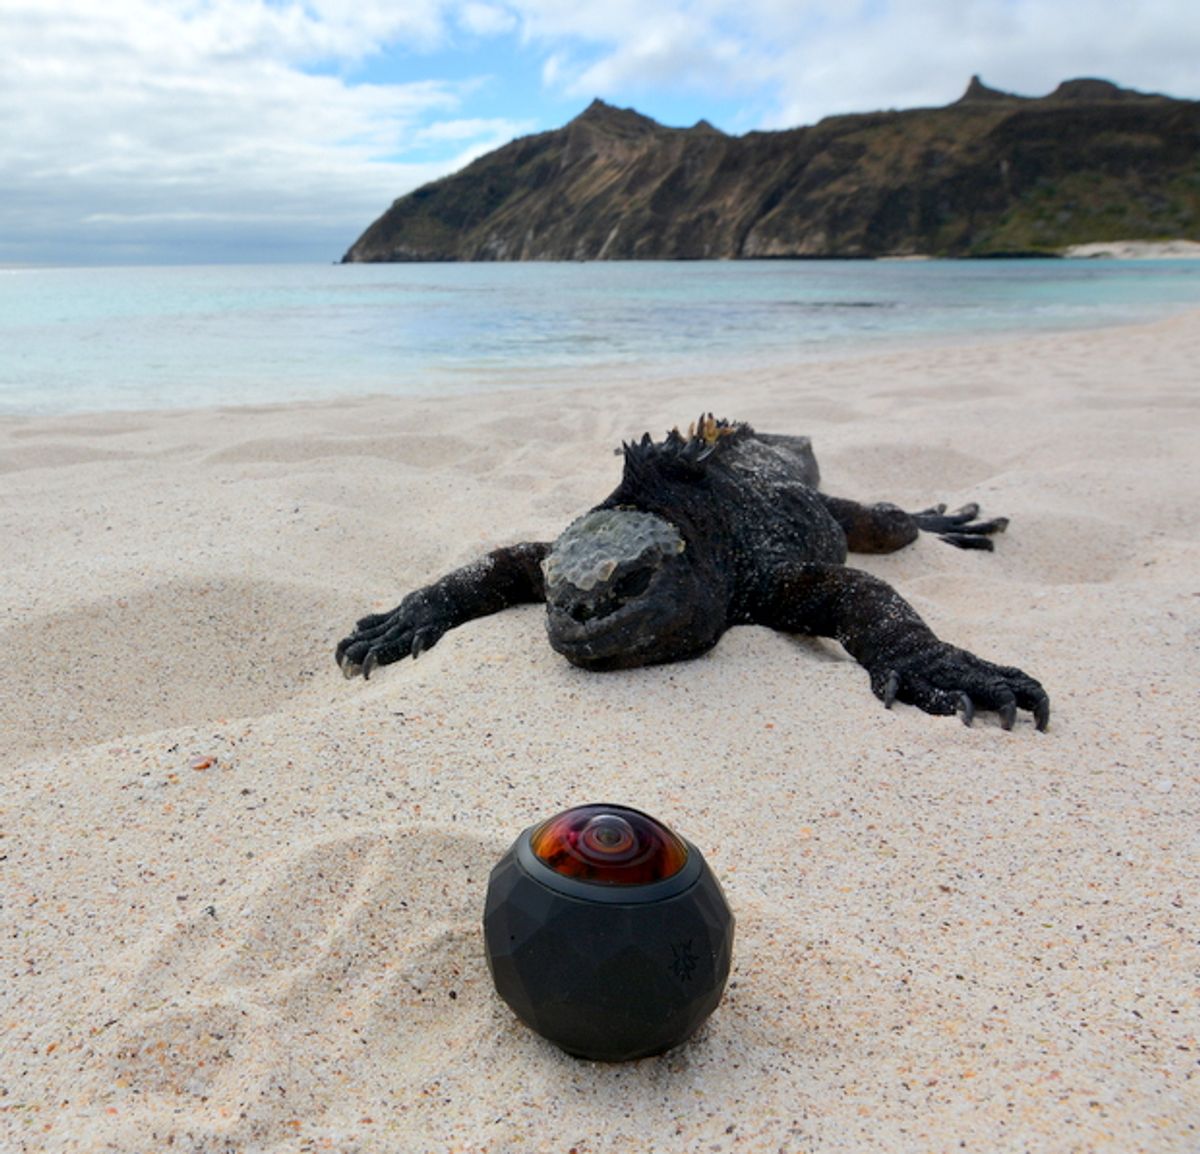 An image of a marine iguana snoozing on a beach within a meter of the 360fly 4K camera. 